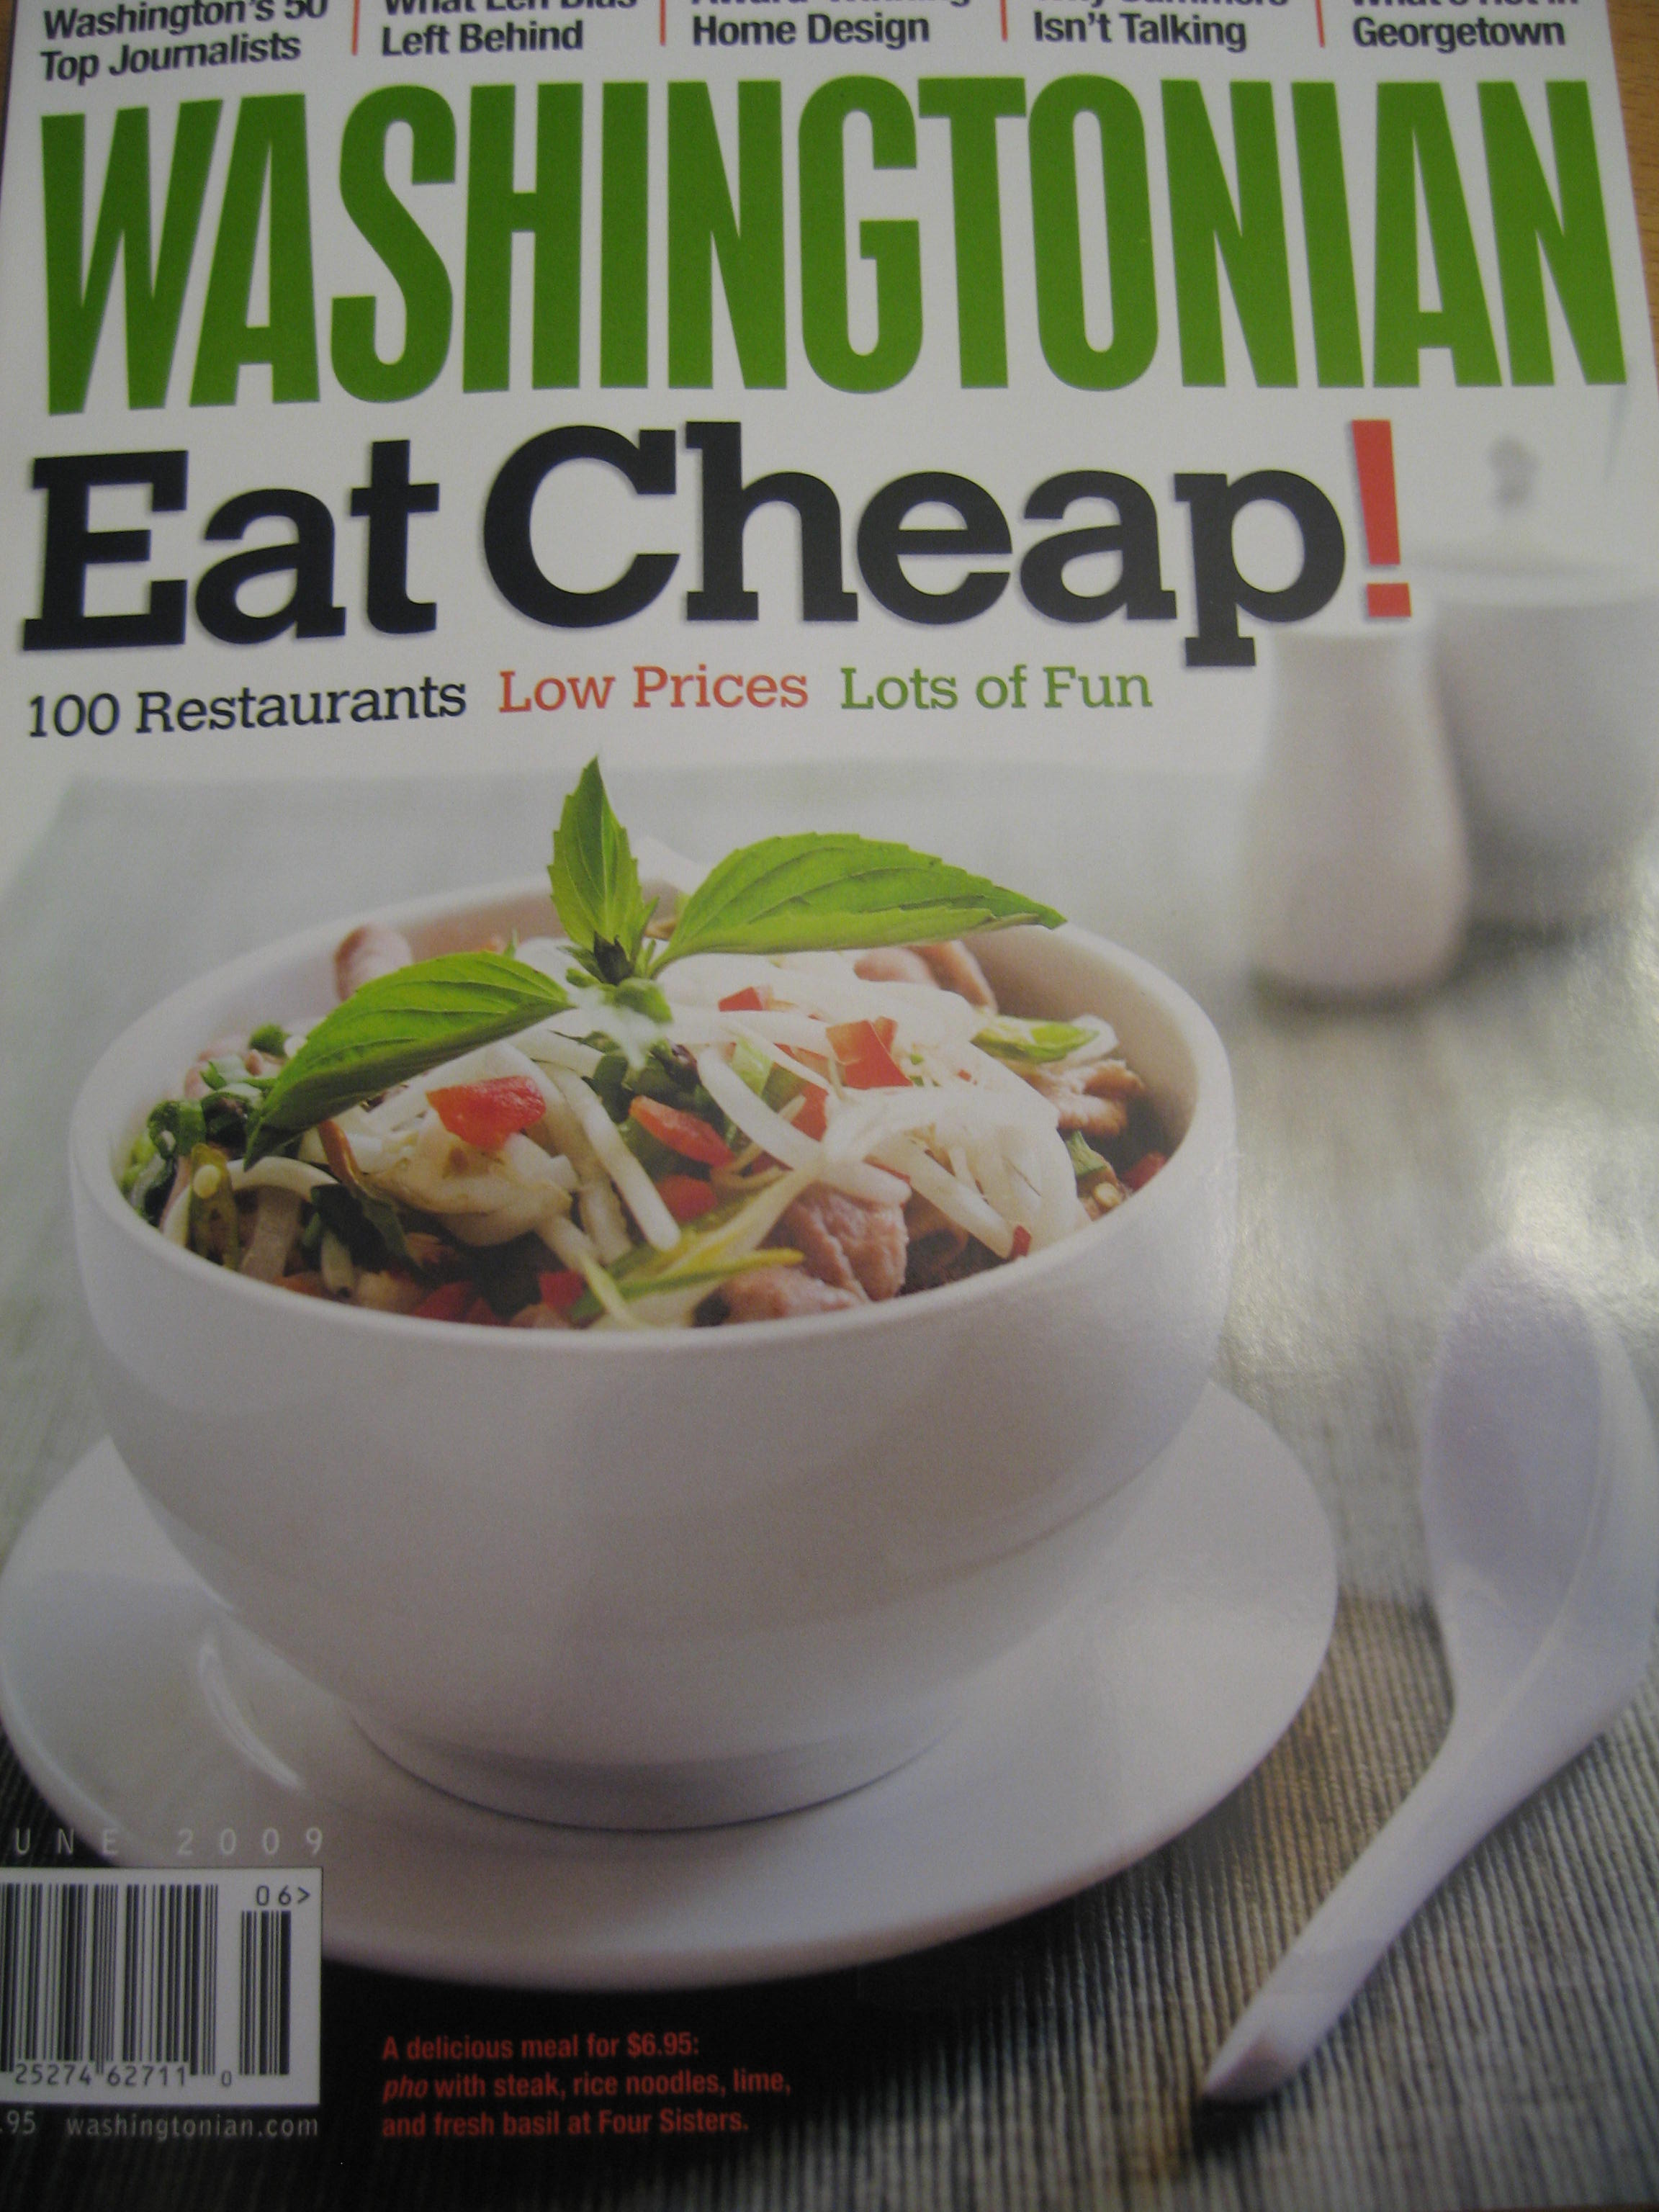 Washingtonian’s Cheap Eats Issue is Out! | Dining In DC